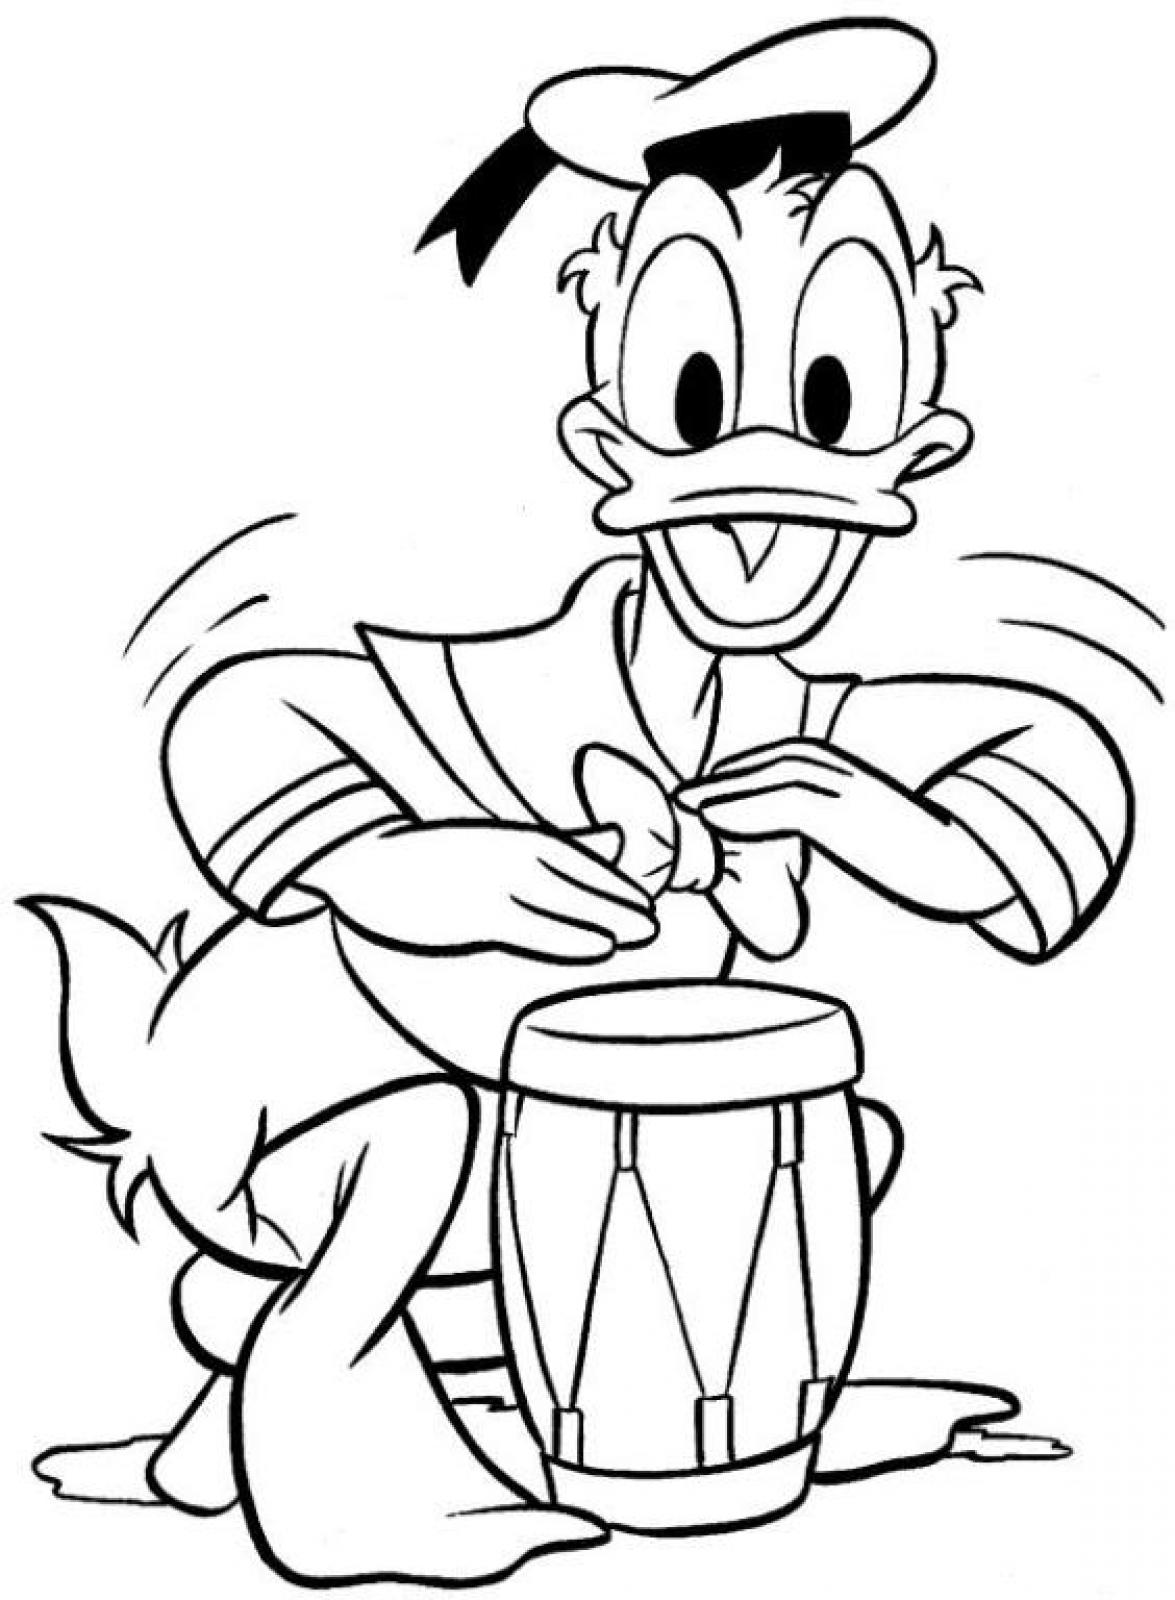 Download Printable Donald Duck Coloring Pages Coloringme Com